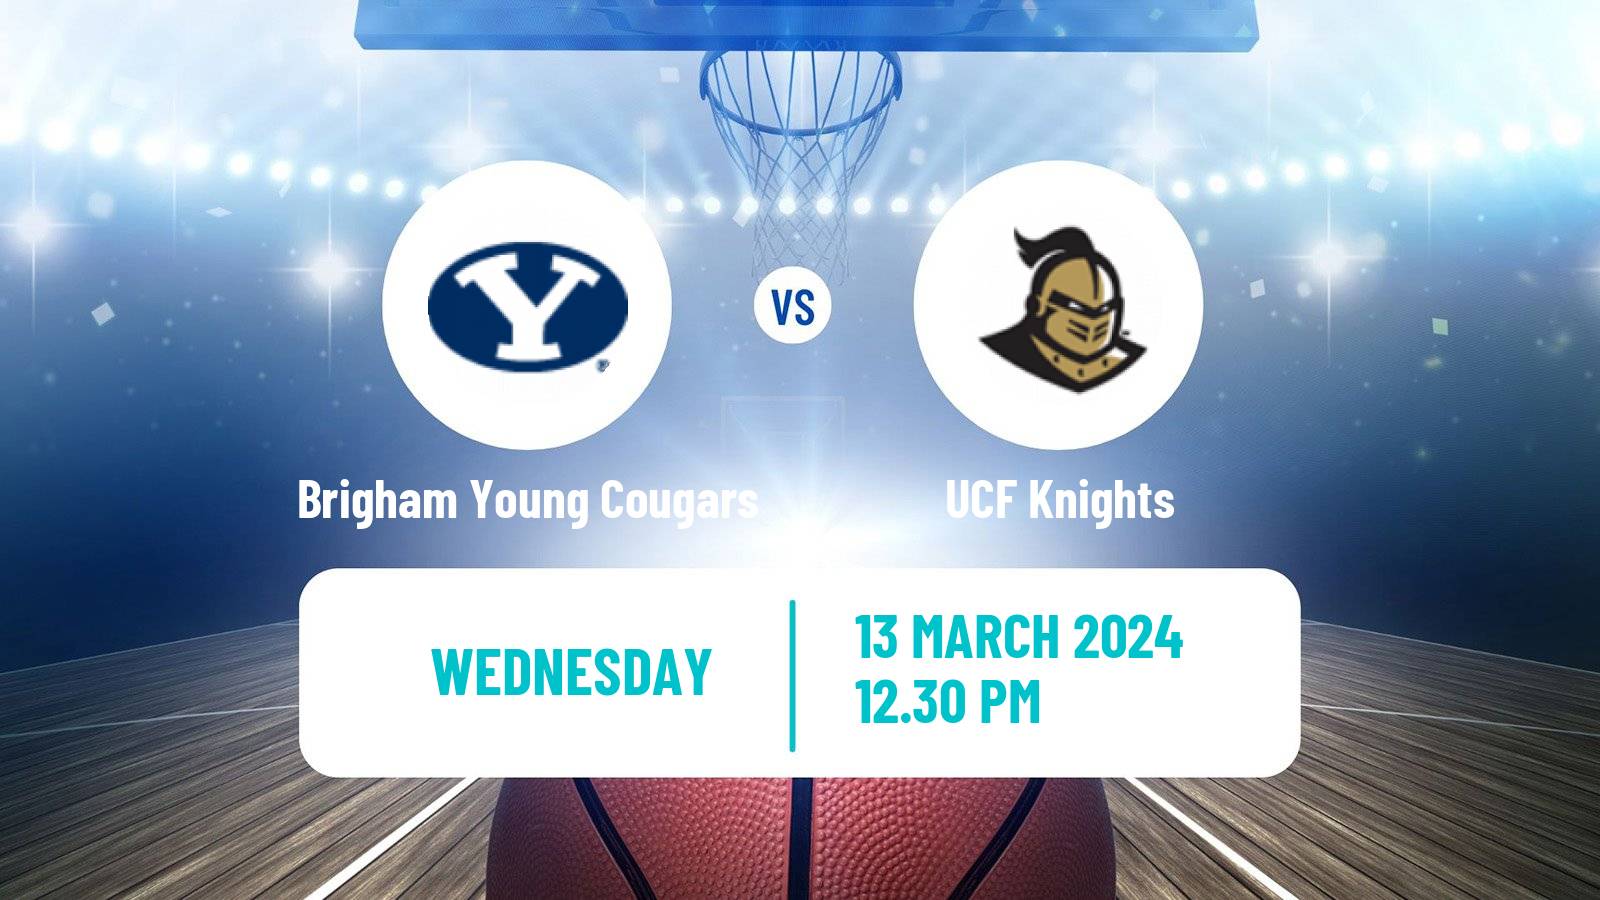 Basketball NCAA College Basketball Brigham Young Cougars - UCF Knights